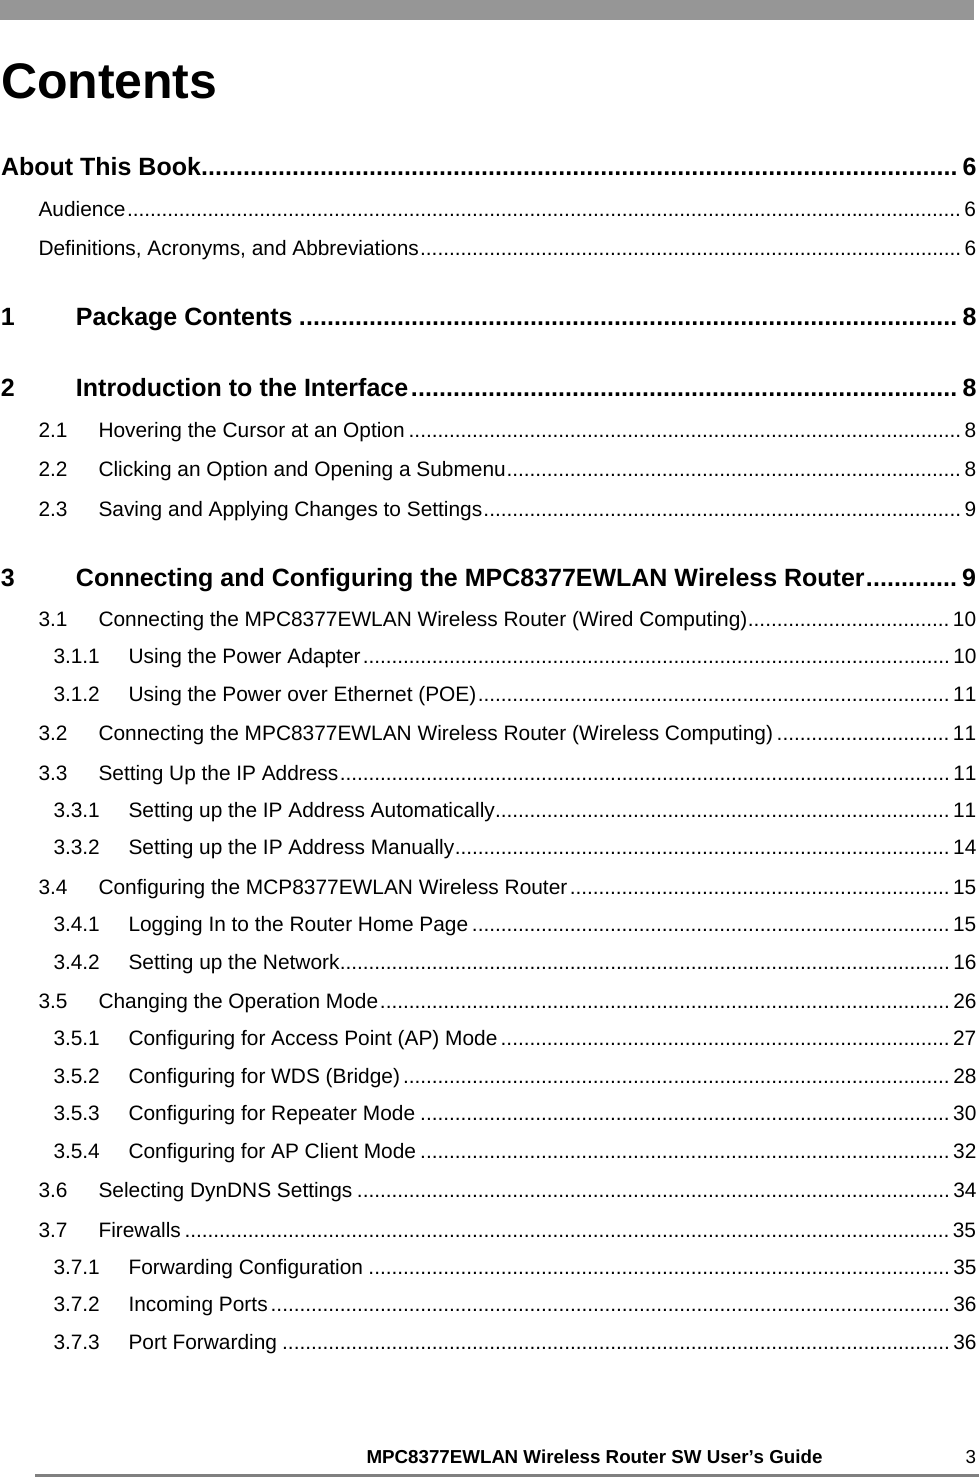     MPC8377EWLAN Wireless Router SW User’s Guide 3 Contents About This Book............................................................................................................ 6 Audience................................................................................................................................................. 6 Definitions, Acronyms, and Abbreviations.............................................................................................. 6 1 Package Contents .............................................................................................. 8 2 Introduction to the Interface.............................................................................. 8 2.1 Hovering the Cursor at an Option ................................................................................................ 8 2.2 Clicking an Option and Opening a Submenu............................................................................... 8 2.3 Saving and Applying Changes to Settings................................................................................... 9 3 Connecting and Configuring the MPC8377EWLAN Wireless Router............. 9 3.1 Connecting the MPC8377EWLAN Wireless Router (Wired Computing)................................... 10 3.1.1 Using the Power Adapter...................................................................................................... 10 3.1.2 Using the Power over Ethernet (POE).................................................................................. 11 3.2 Connecting the MPC8377EWLAN Wireless Router (Wireless Computing) .............................. 11 3.3 Setting Up the IP Address.......................................................................................................... 11 3.3.1 Setting up the IP Address Automatically............................................................................... 11 3.3.2 Setting up the IP Address Manually...................................................................................... 14 3.4 Configuring the MCP8377EWLAN Wireless Router.................................................................. 15 3.4.1 Logging In to the Router Home Page ................................................................................... 15 3.4.2 Setting up the Network.......................................................................................................... 16 3.5 Changing the Operation Mode................................................................................................... 26 3.5.1 Configuring for Access Point (AP) Mode .............................................................................. 27 3.5.2 Configuring for WDS (Bridge)............................................................................................... 28 3.5.3 Configuring for Repeater Mode ............................................................................................ 30 3.5.4 Configuring for AP Client Mode ............................................................................................ 32 3.6 Selecting DynDNS Settings ....................................................................................................... 34 3.7 Firewalls ..................................................................................................................................... 35 3.7.1 Forwarding Configuration ..................................................................................................... 35 3.7.2 Incoming Ports...................................................................................................................... 36 3.7.3 Port Forwarding .................................................................................................................... 36 